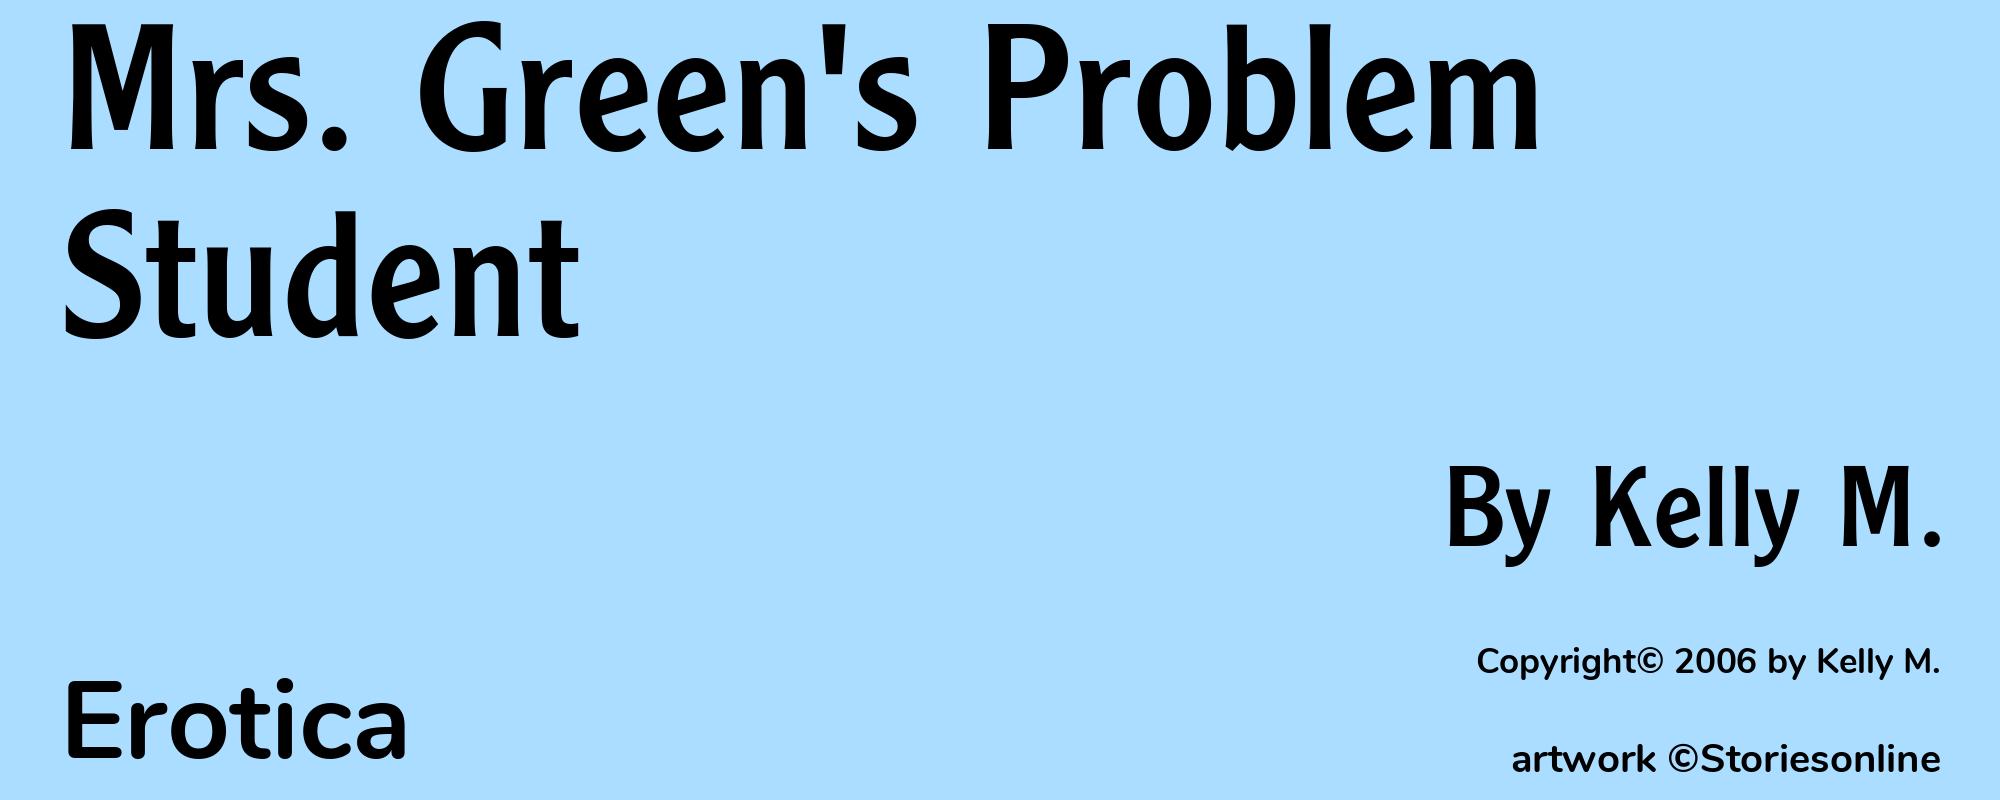 Mrs. Green's Problem Student - Cover